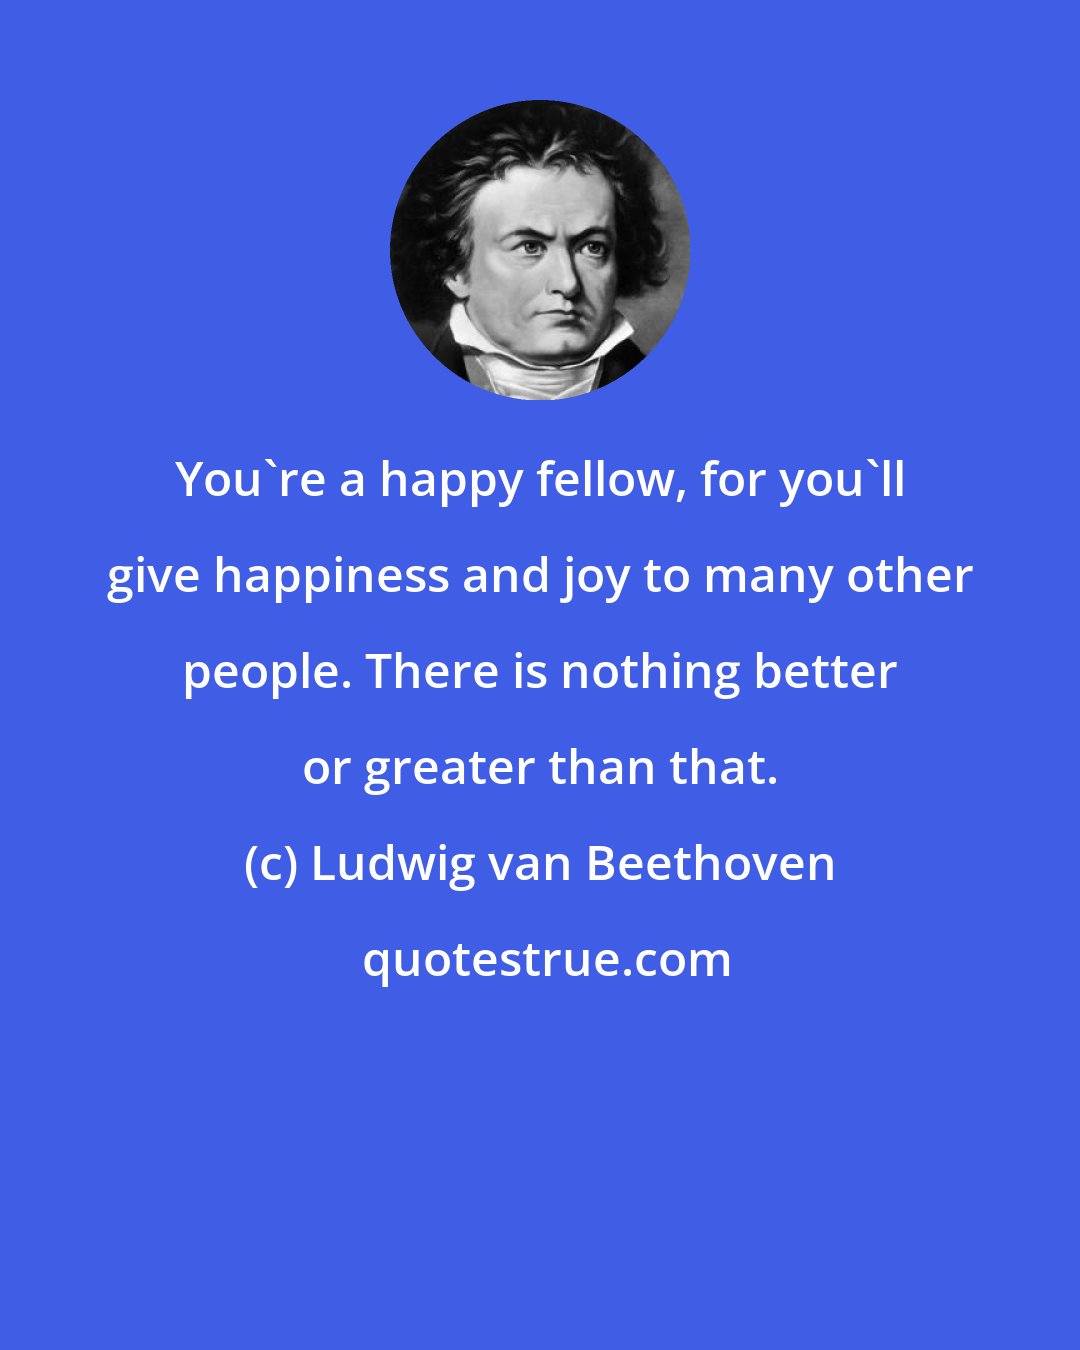 Ludwig van Beethoven: You're a happy fellow, for you'll give happiness and joy to many other people. There is nothing better or greater than that.